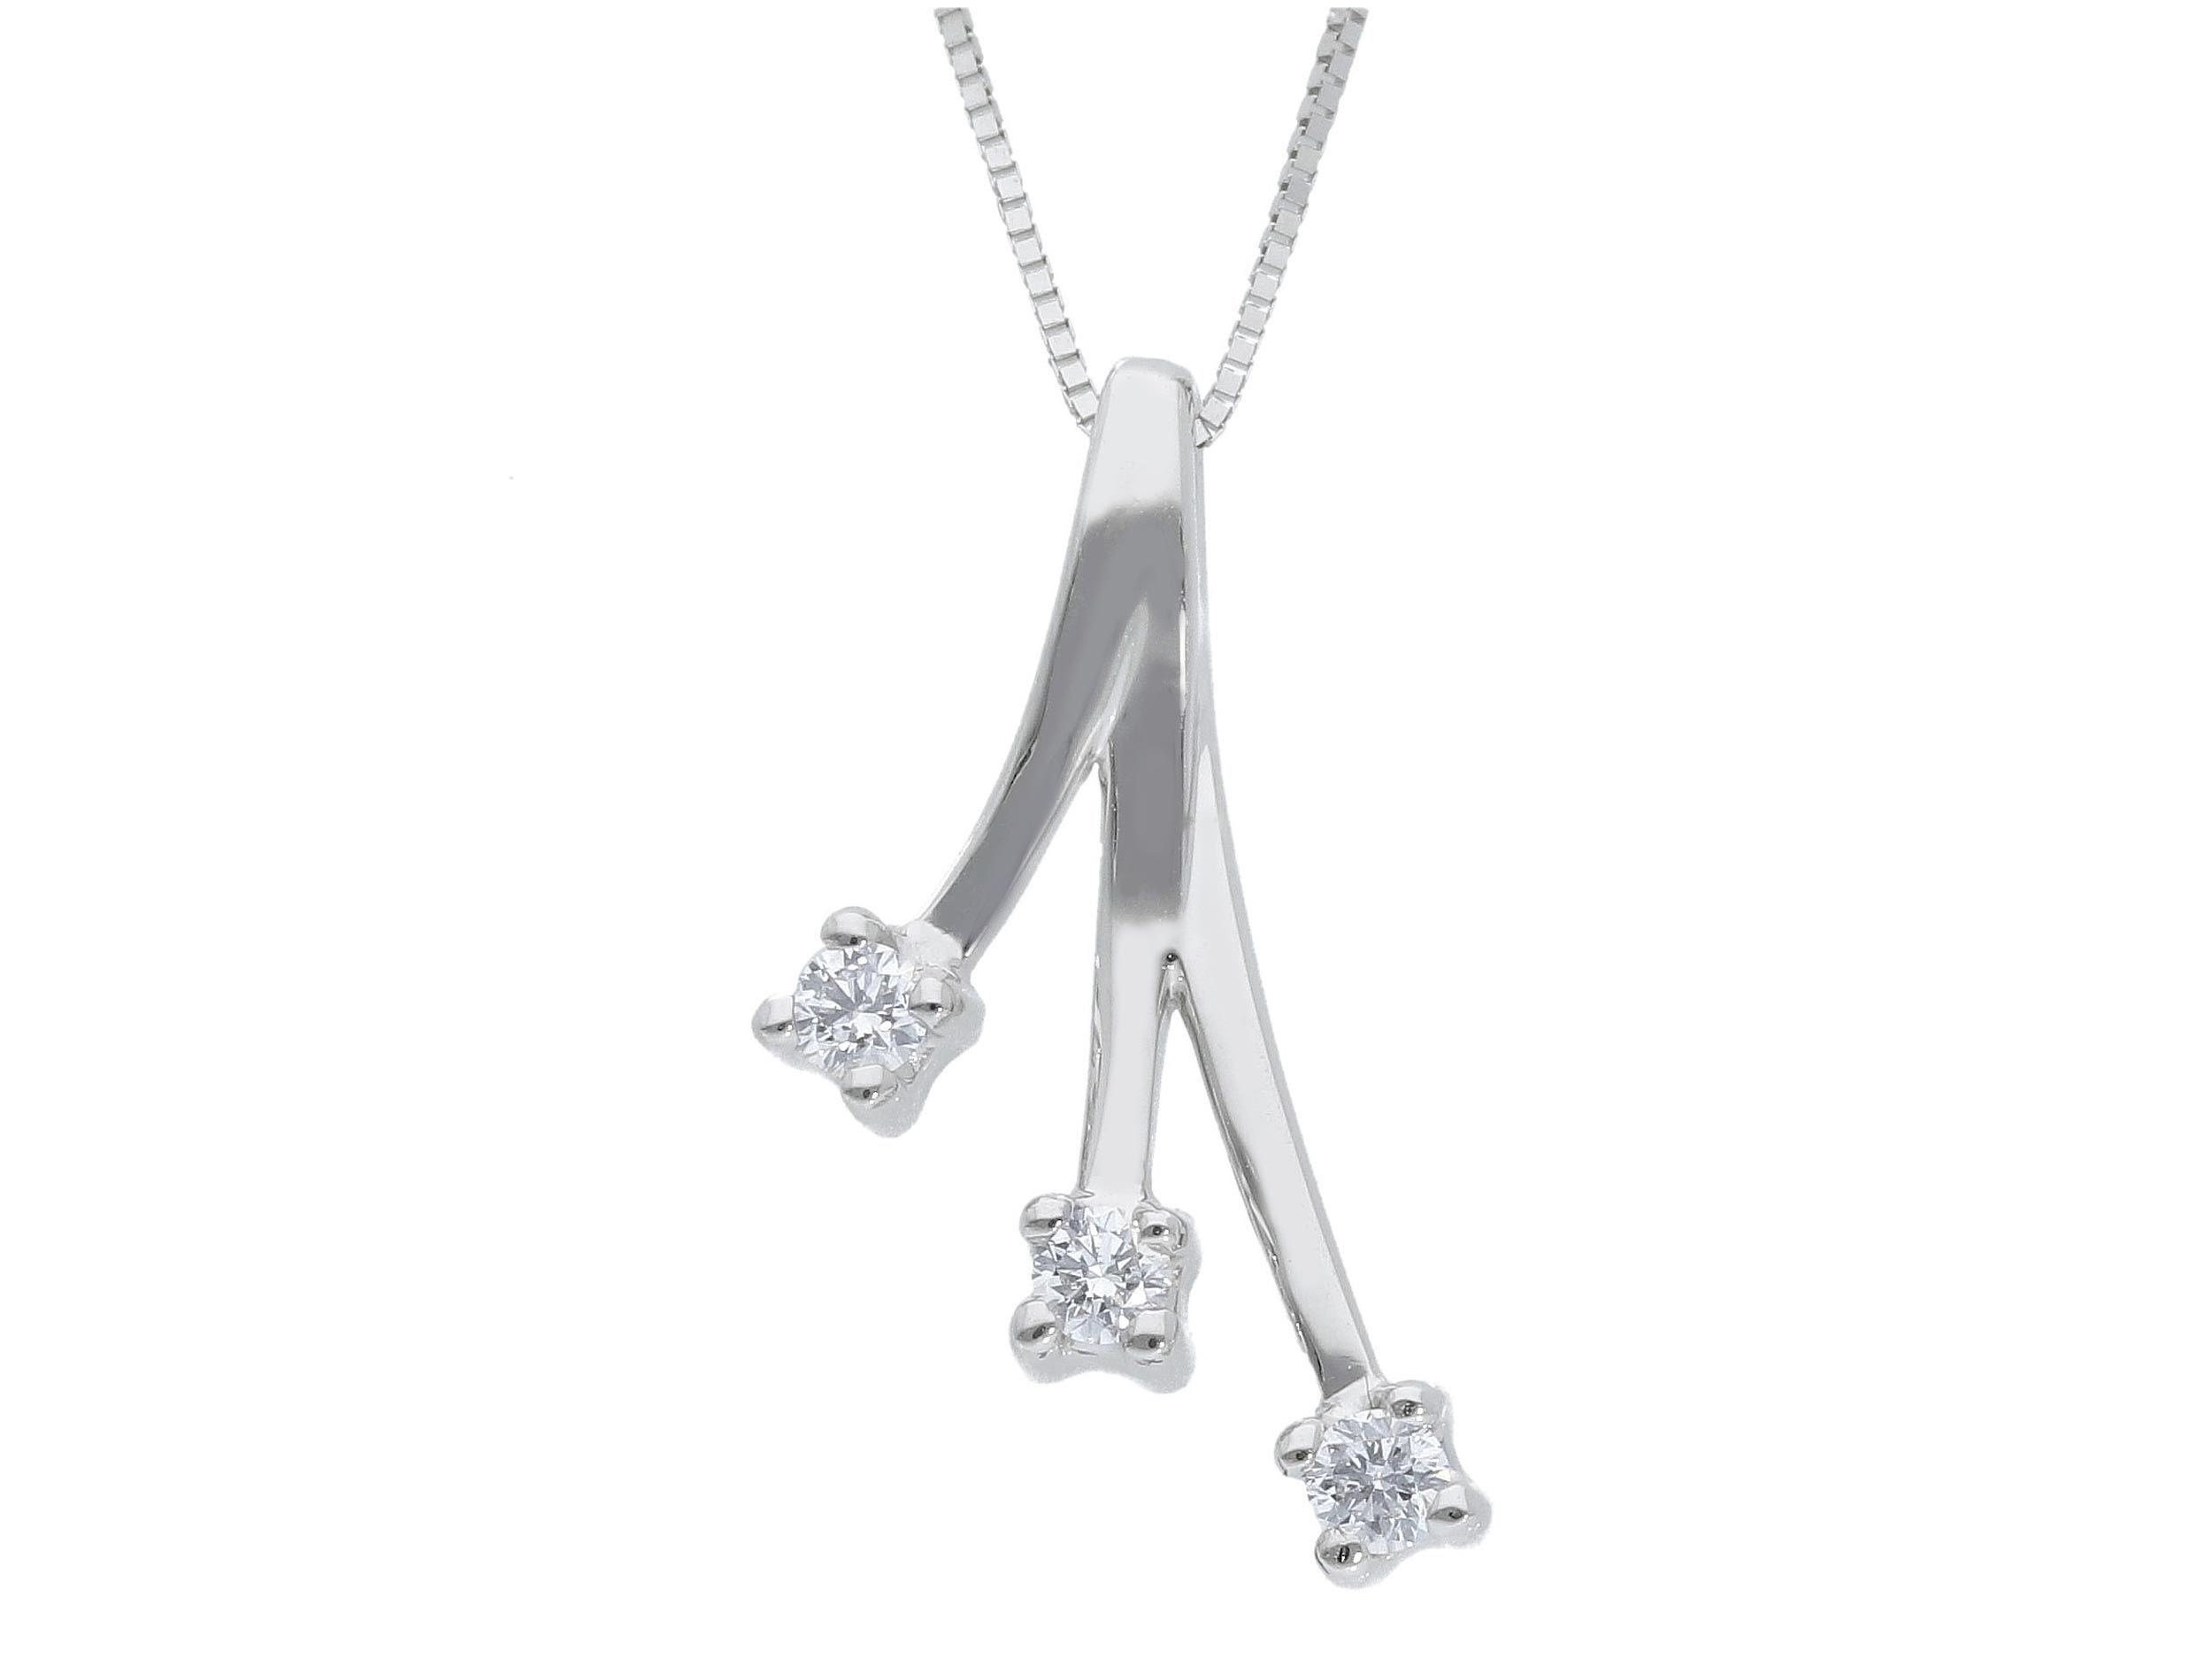  White gold necklace k18 with diamonds (code S225760)